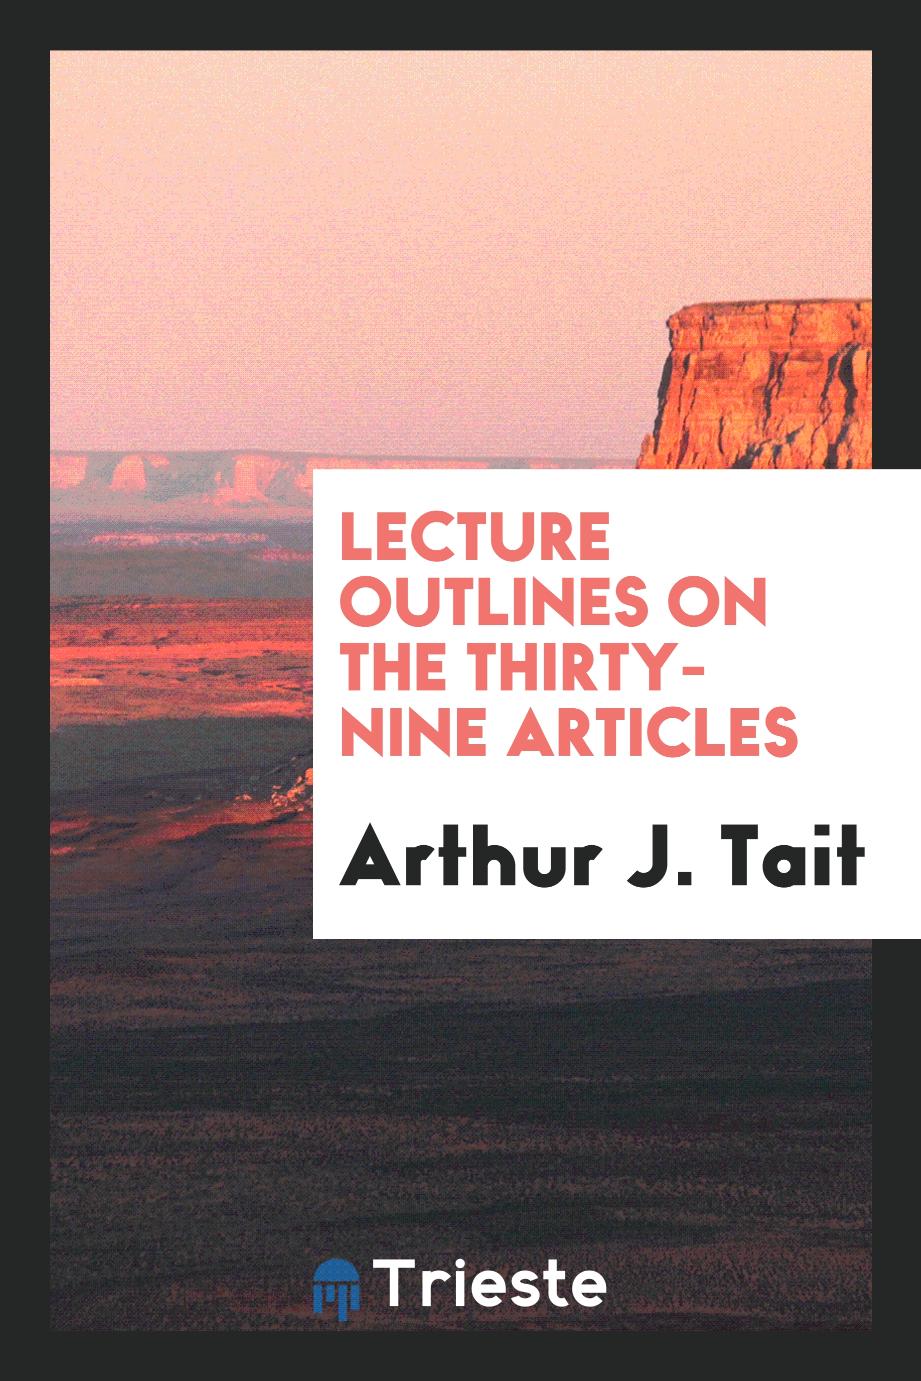 Lecture outlines on the Thirty-nine Articles